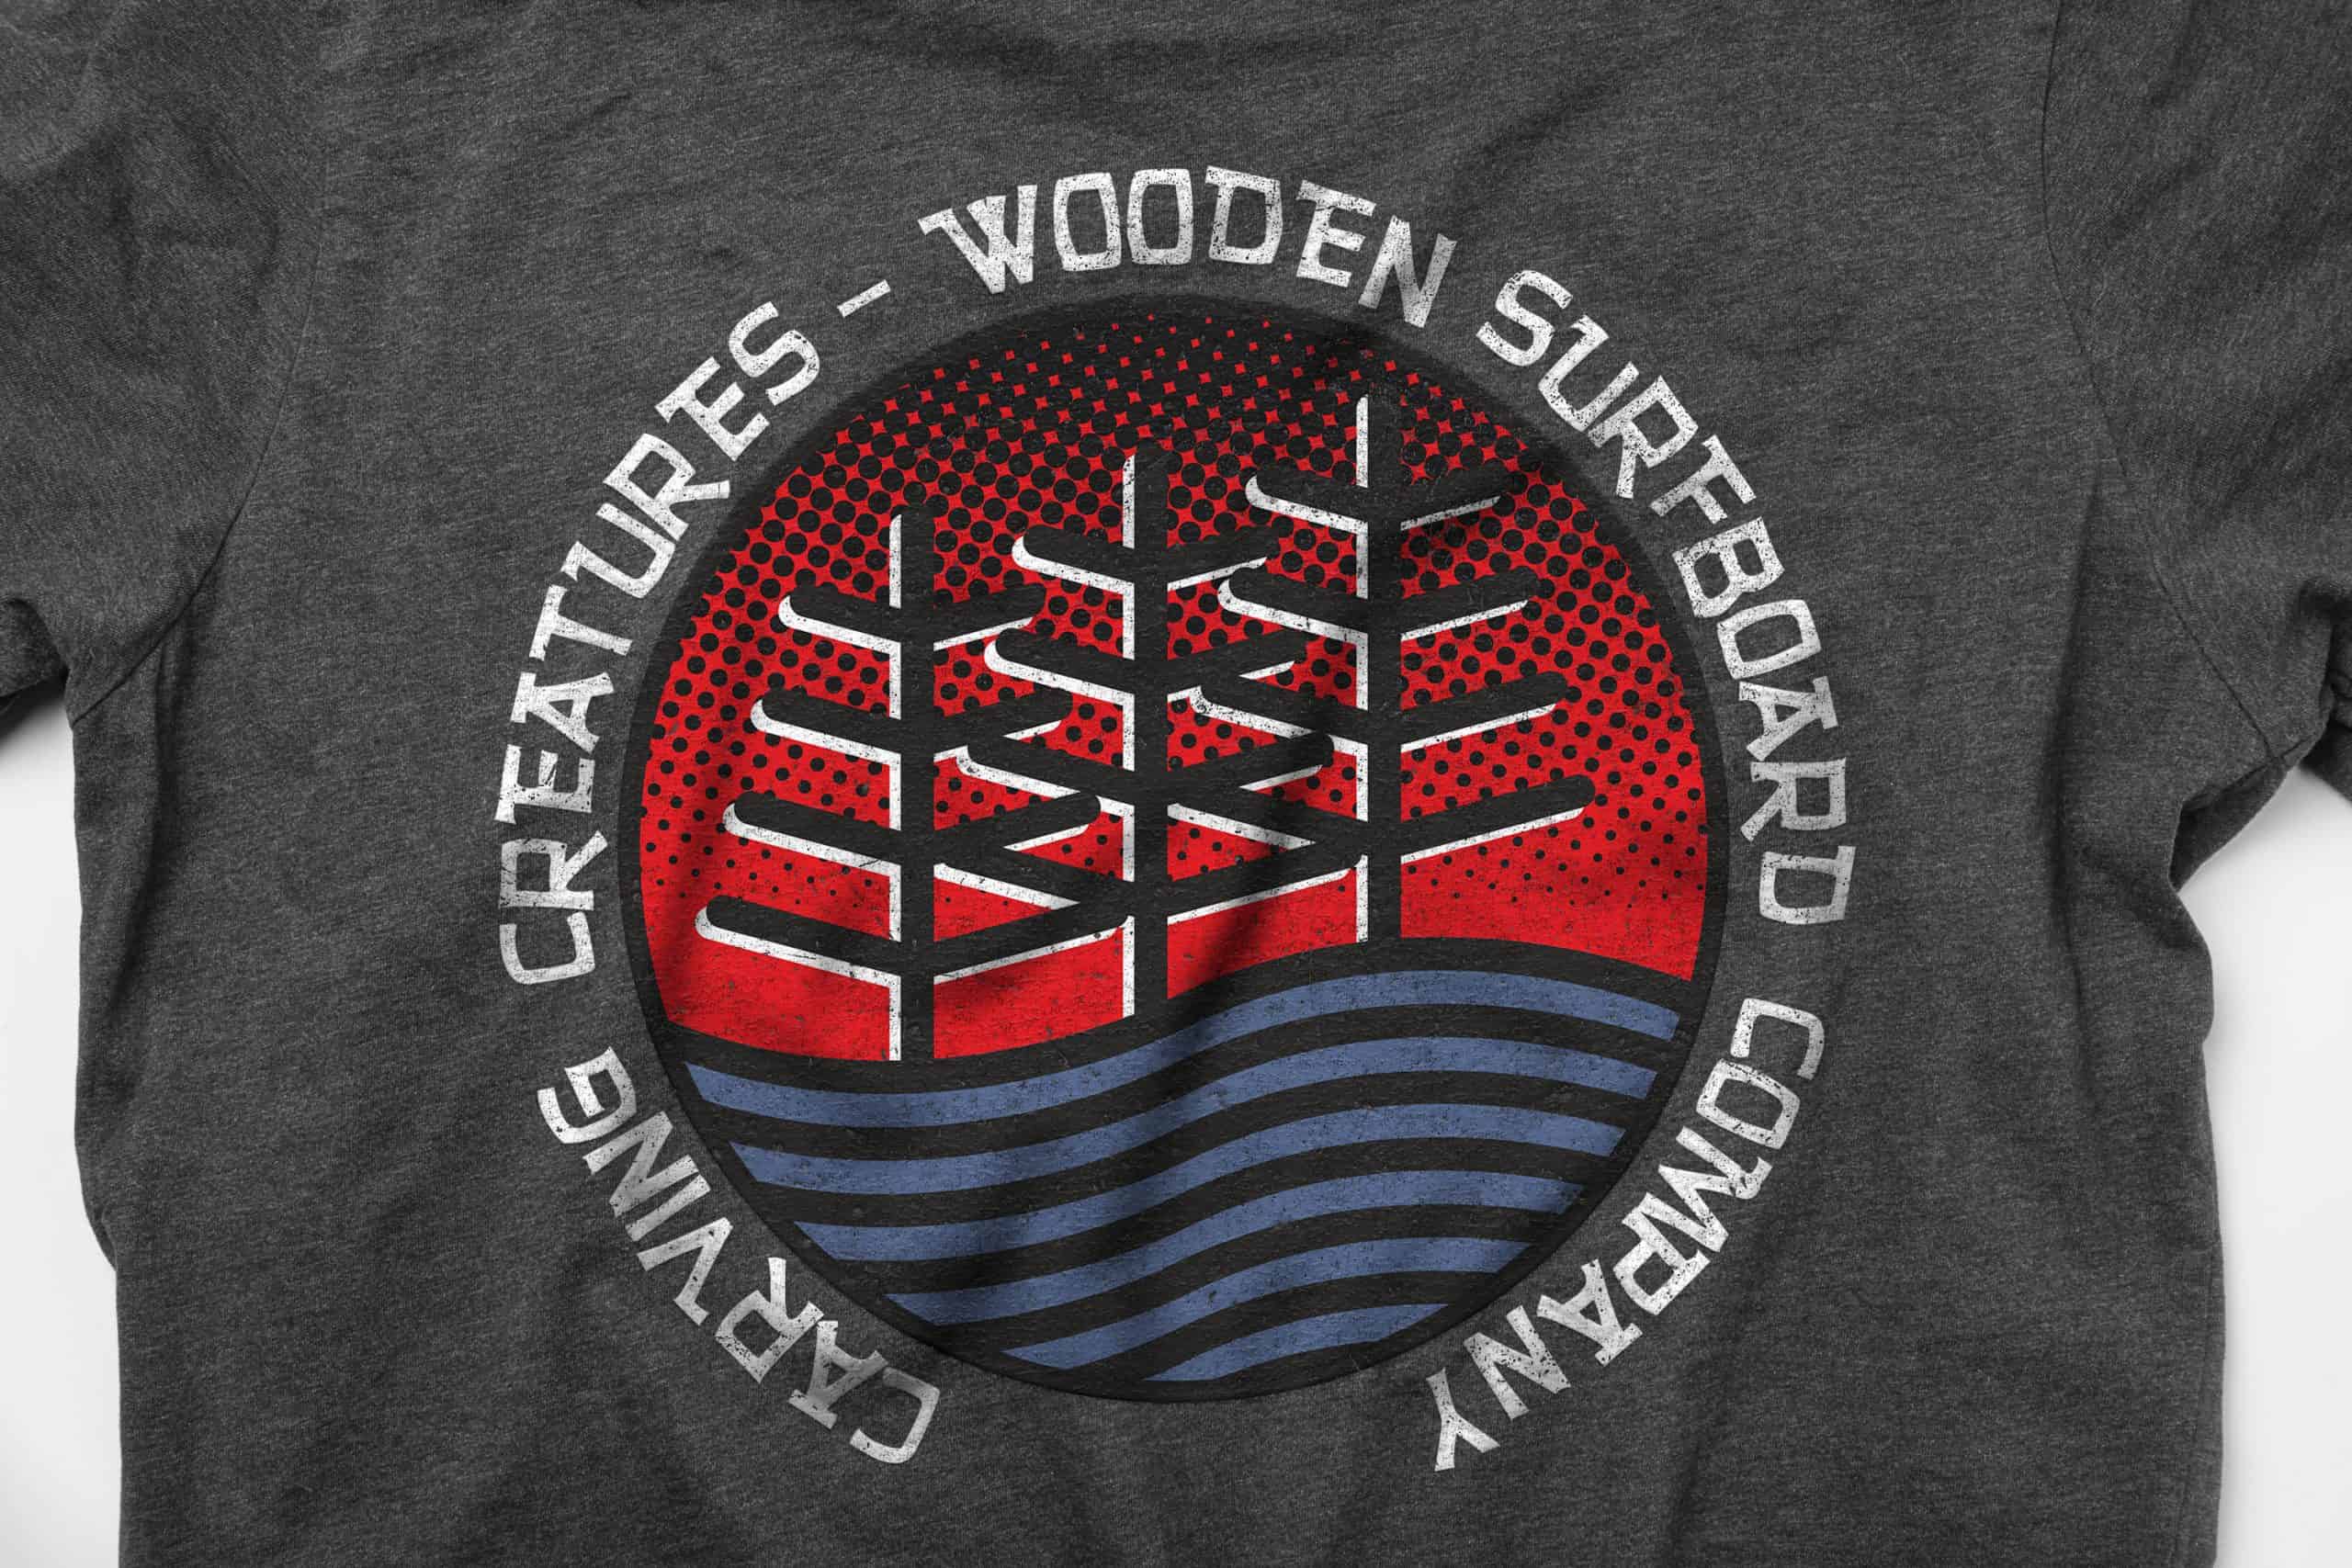 carving creatures wooden surfboard company cotton t-shirt